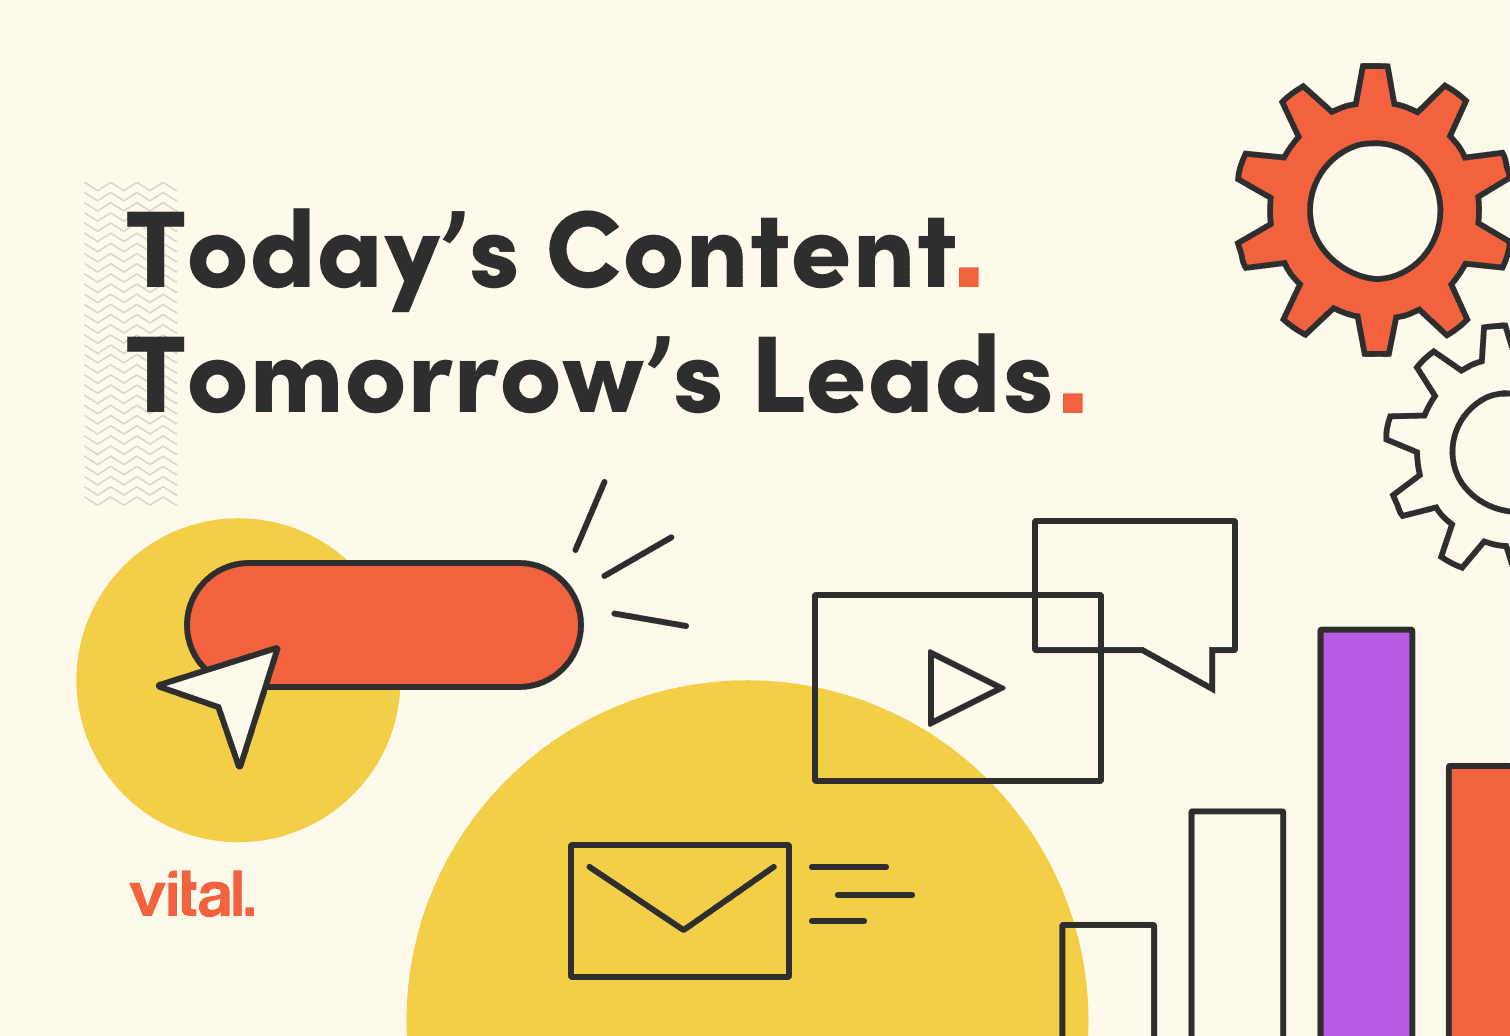 Today's Content. Tomorrow's Leads.